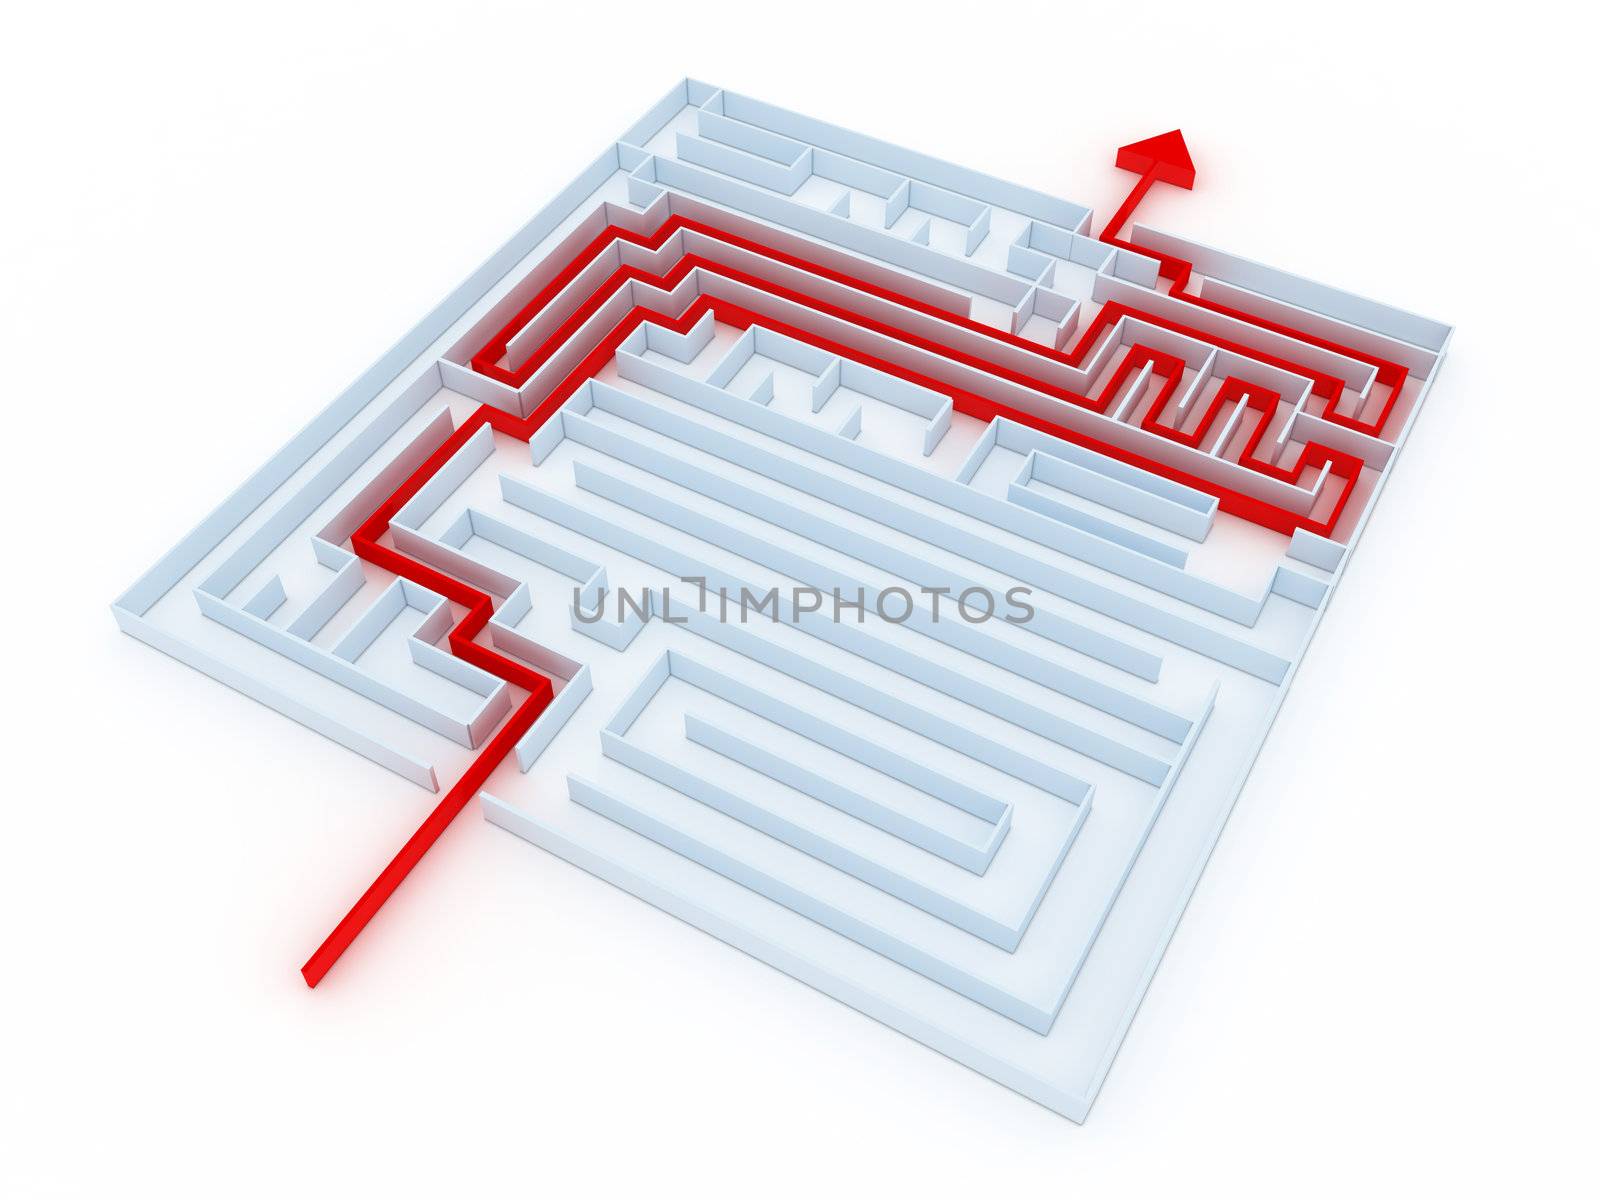 labyrinth of transparent blocks through which the red arrow. 3d computer modeling